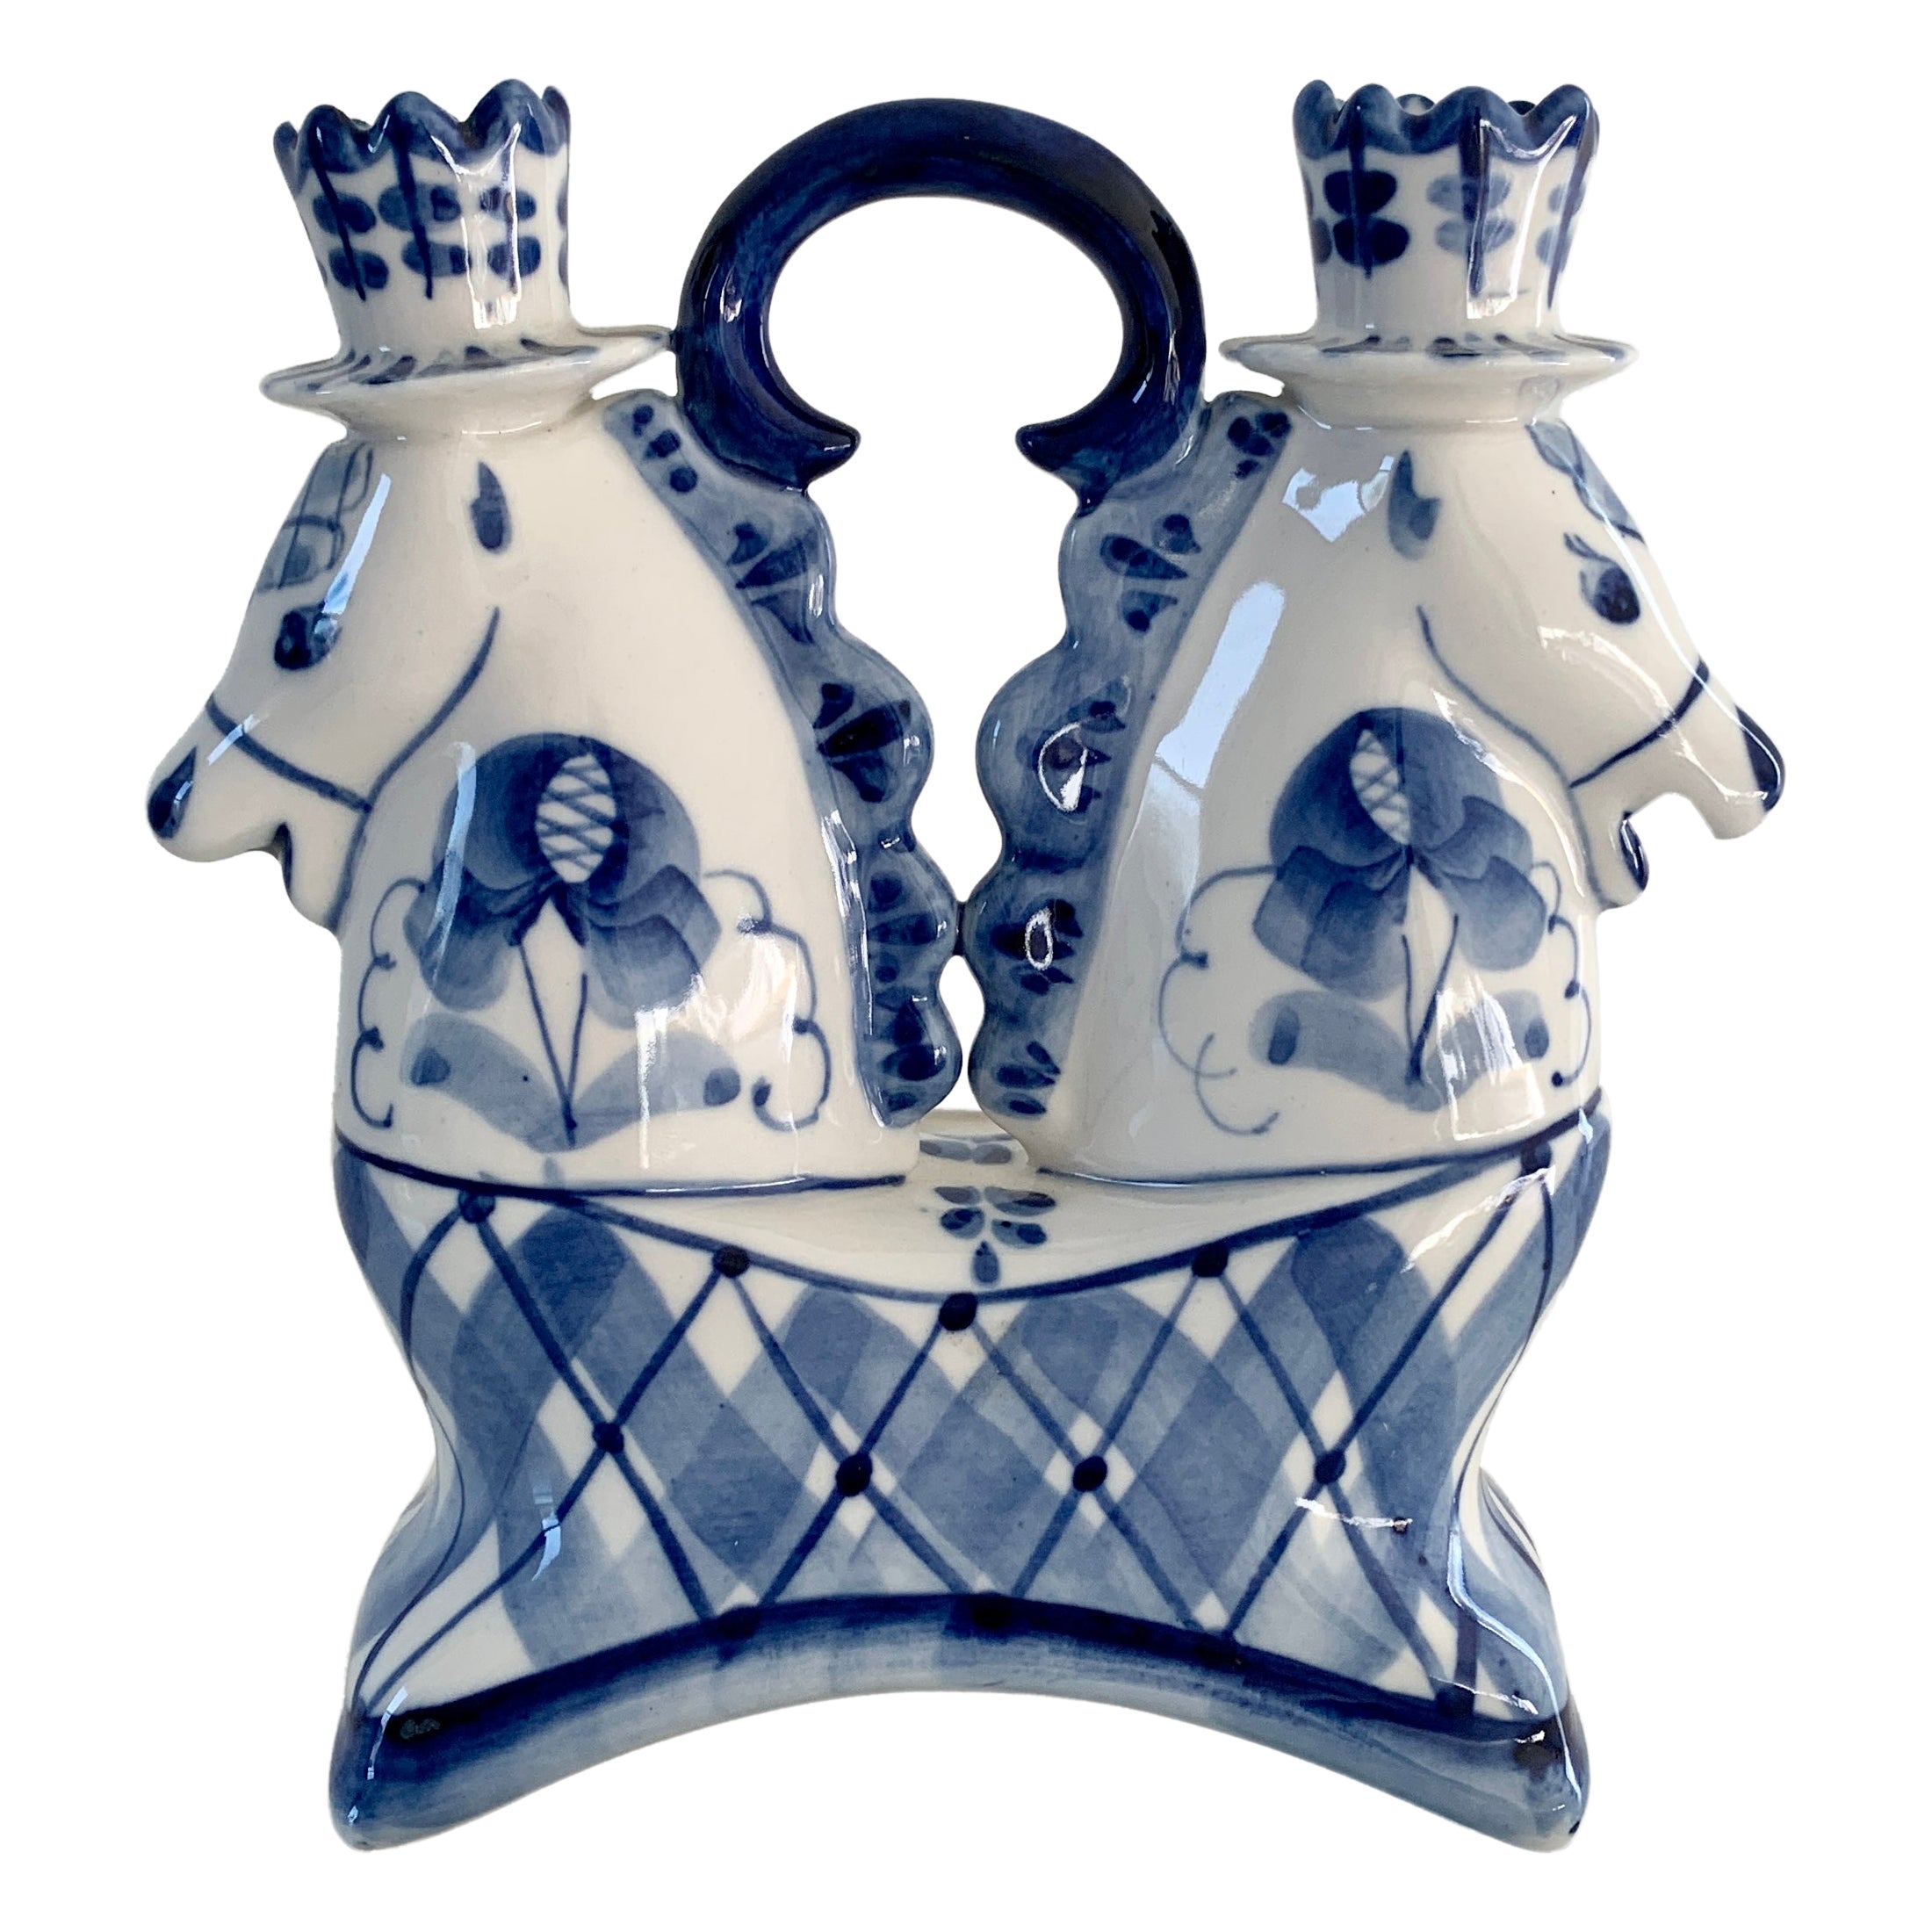 Russian Blue and White Porcelain Double Horse Candle Holder